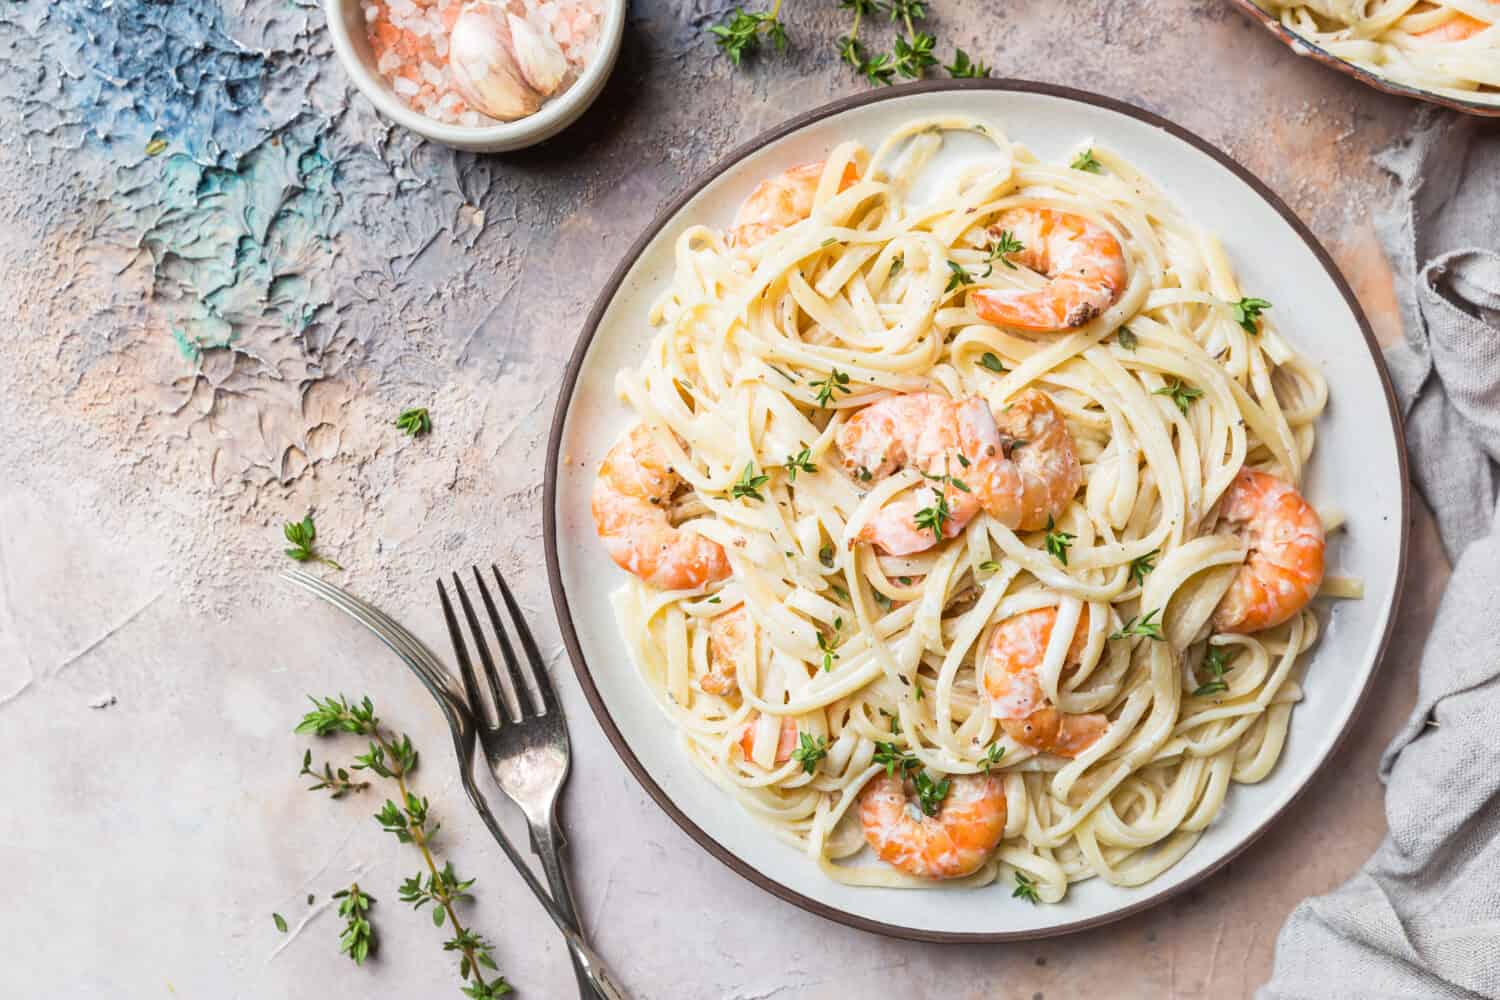 Italian pasta fettuccine in a creamy sauce with shrimp on a plate, top view